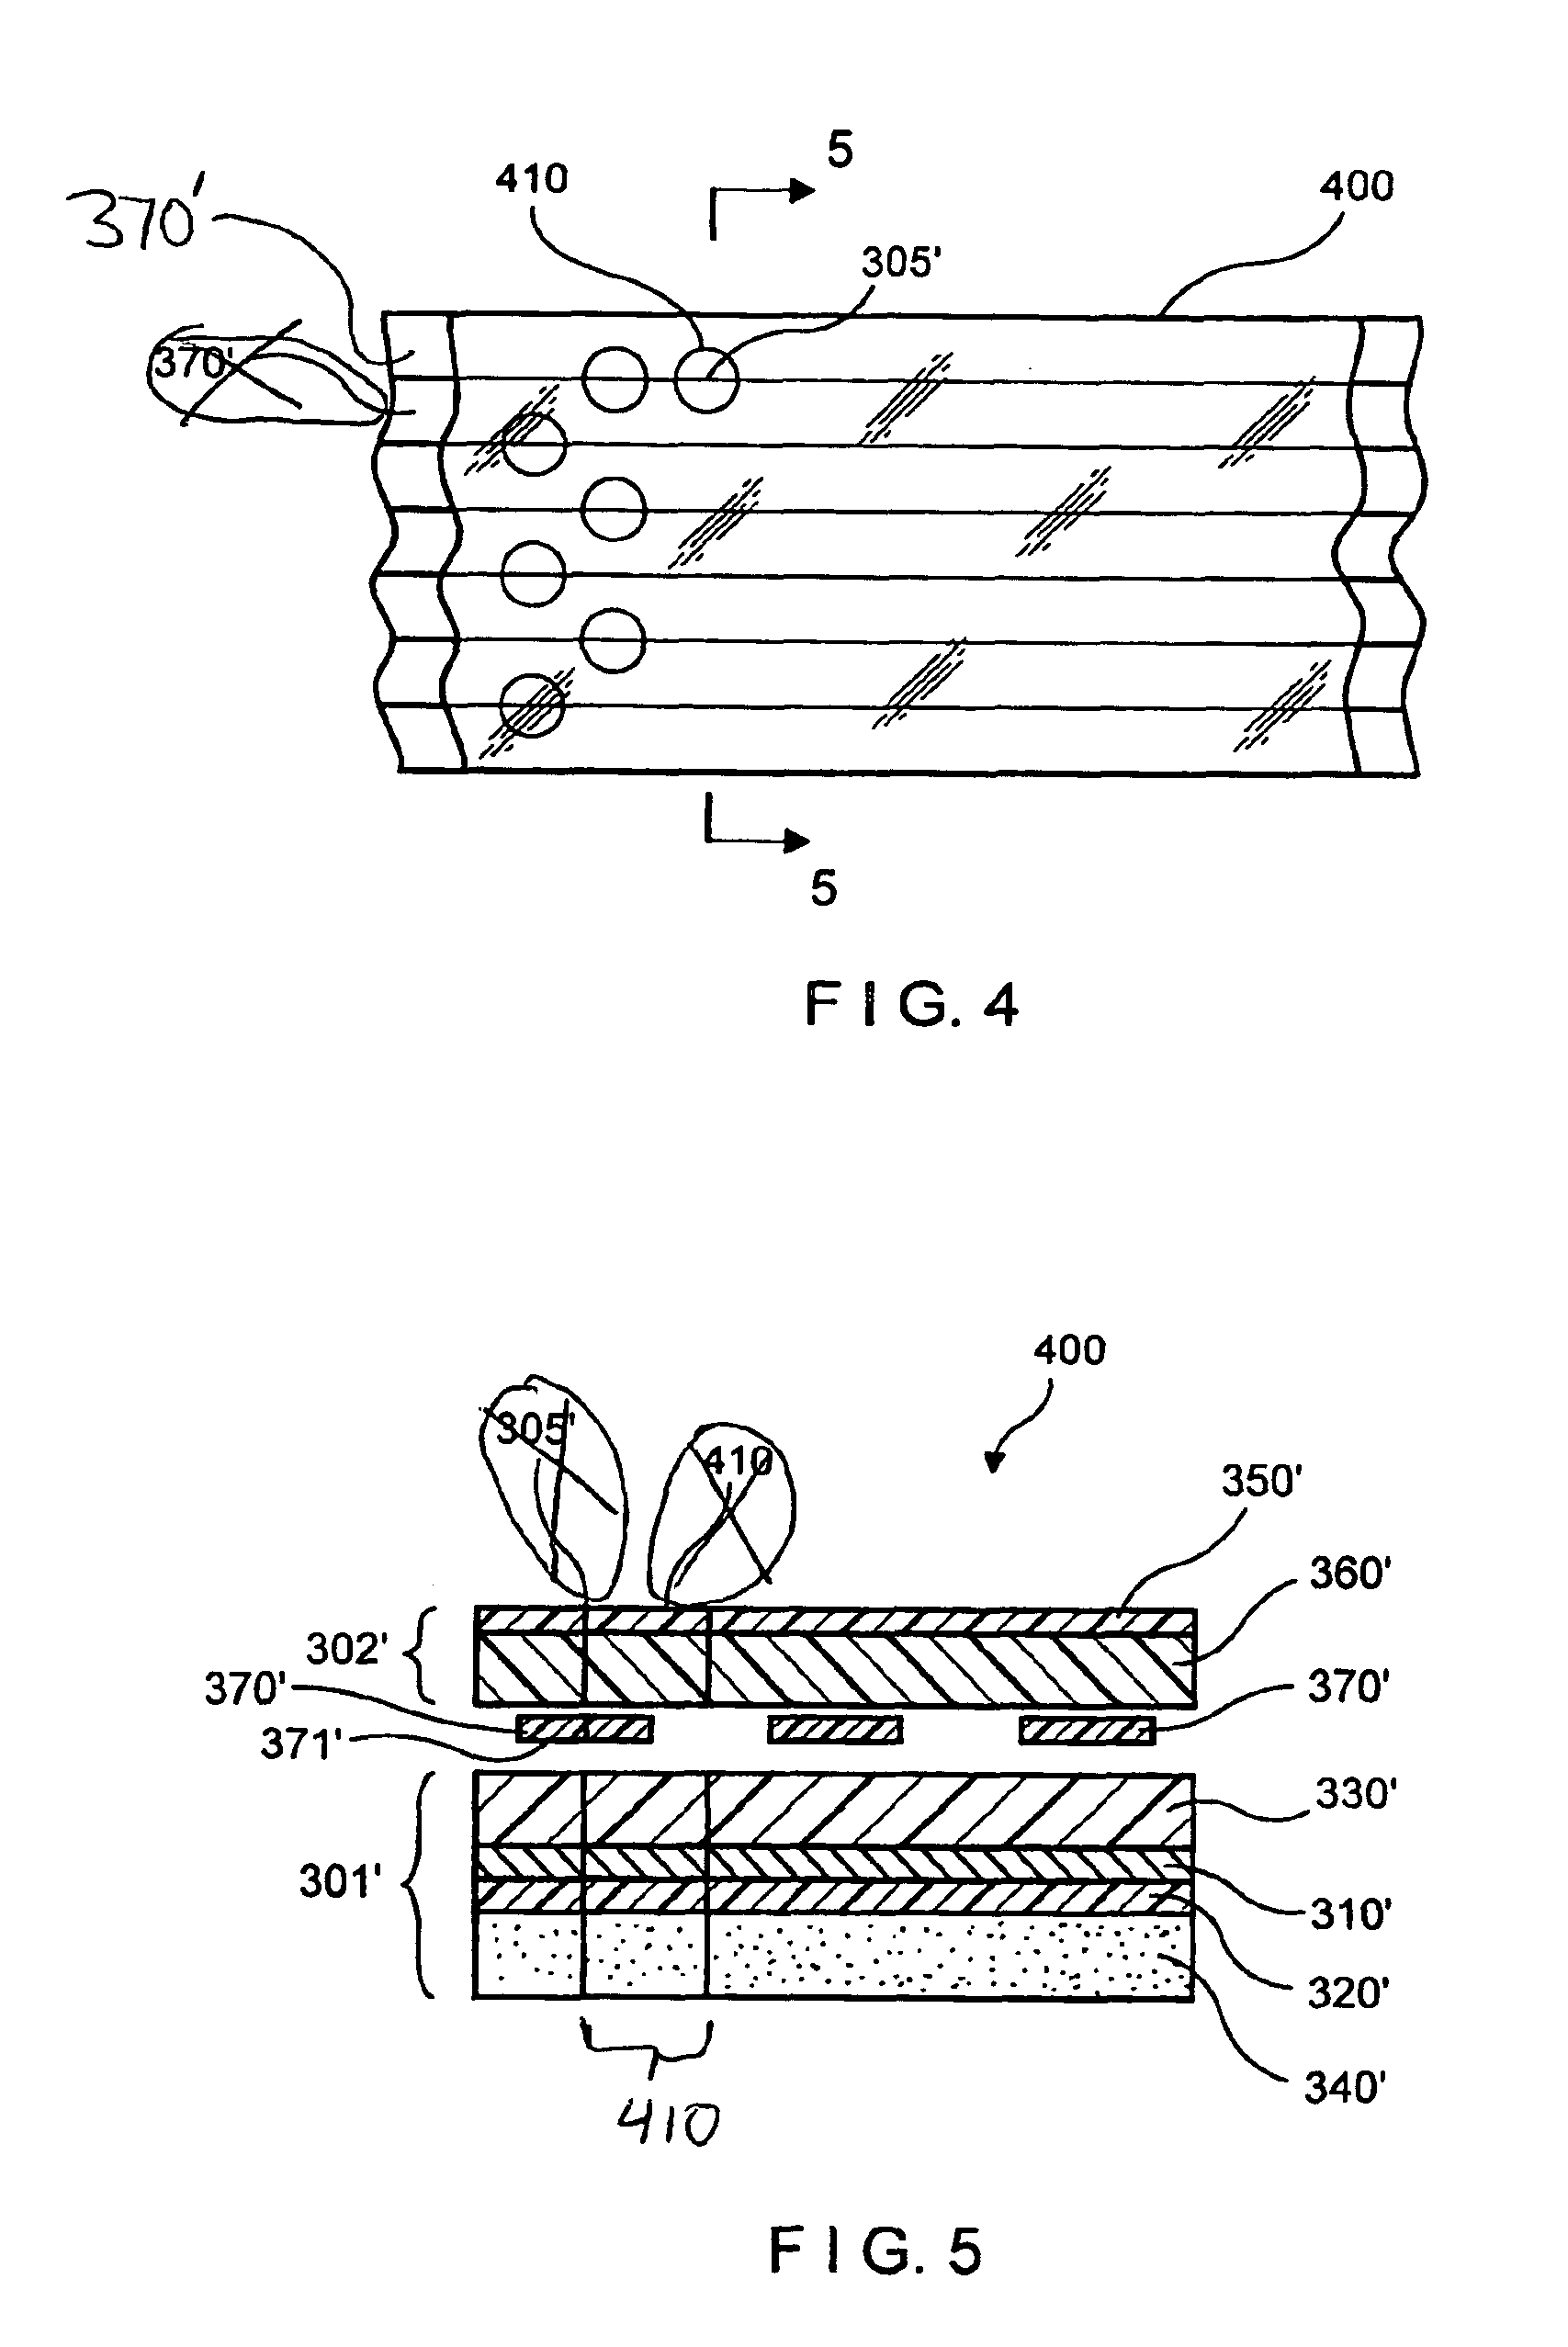 Polymer lined sealing member for a container